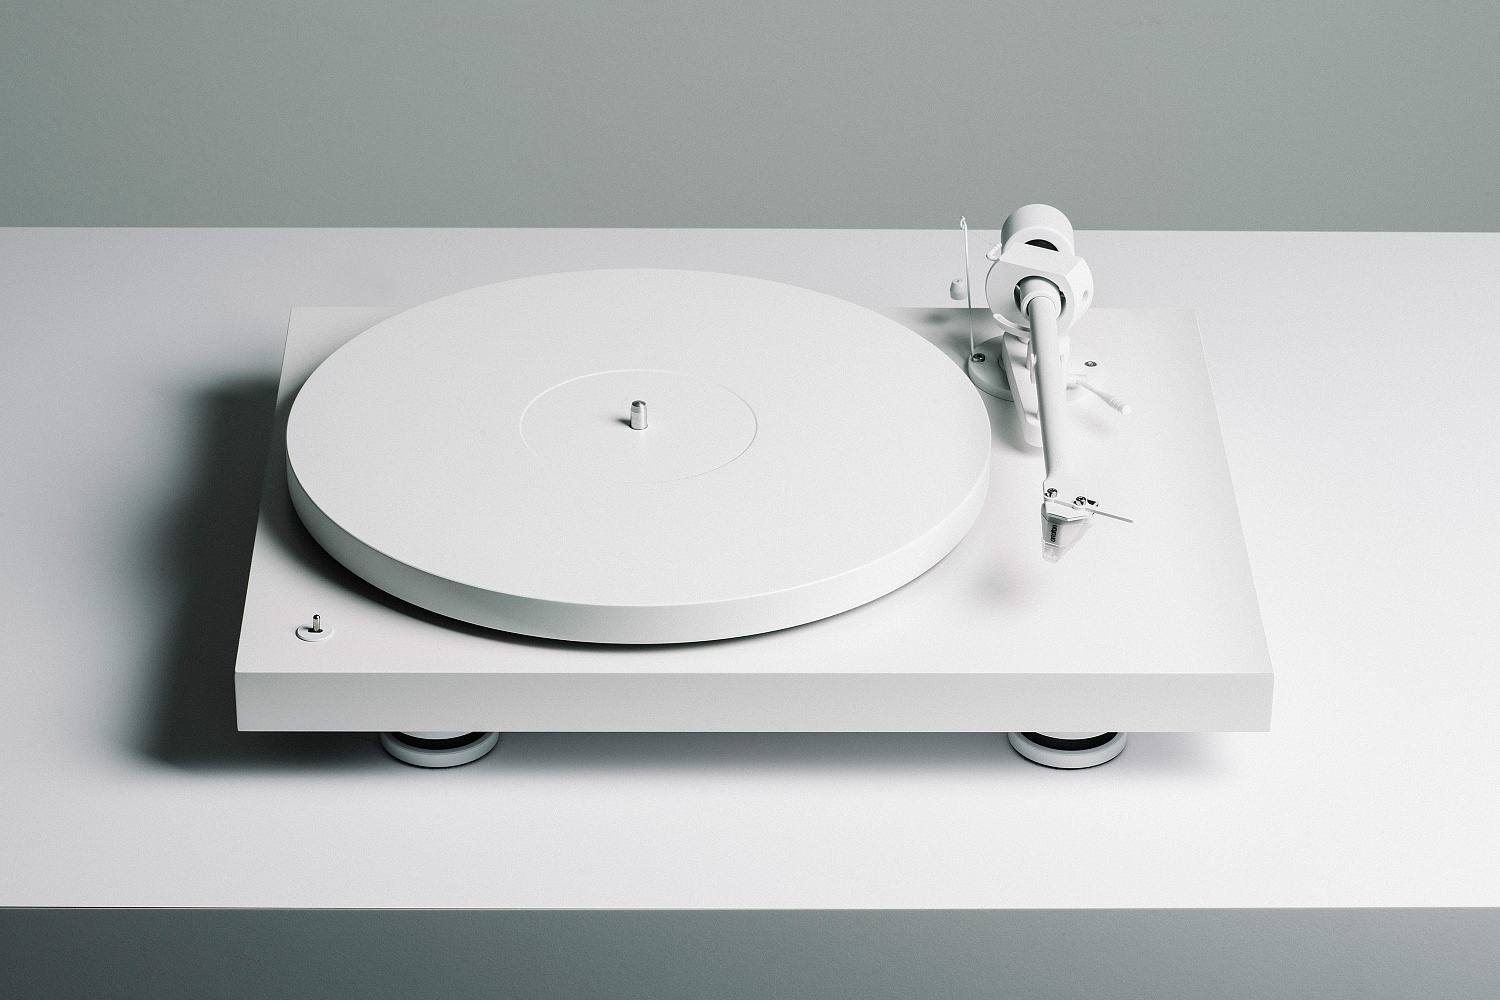 Pro-Ject Debut PRO White Edition